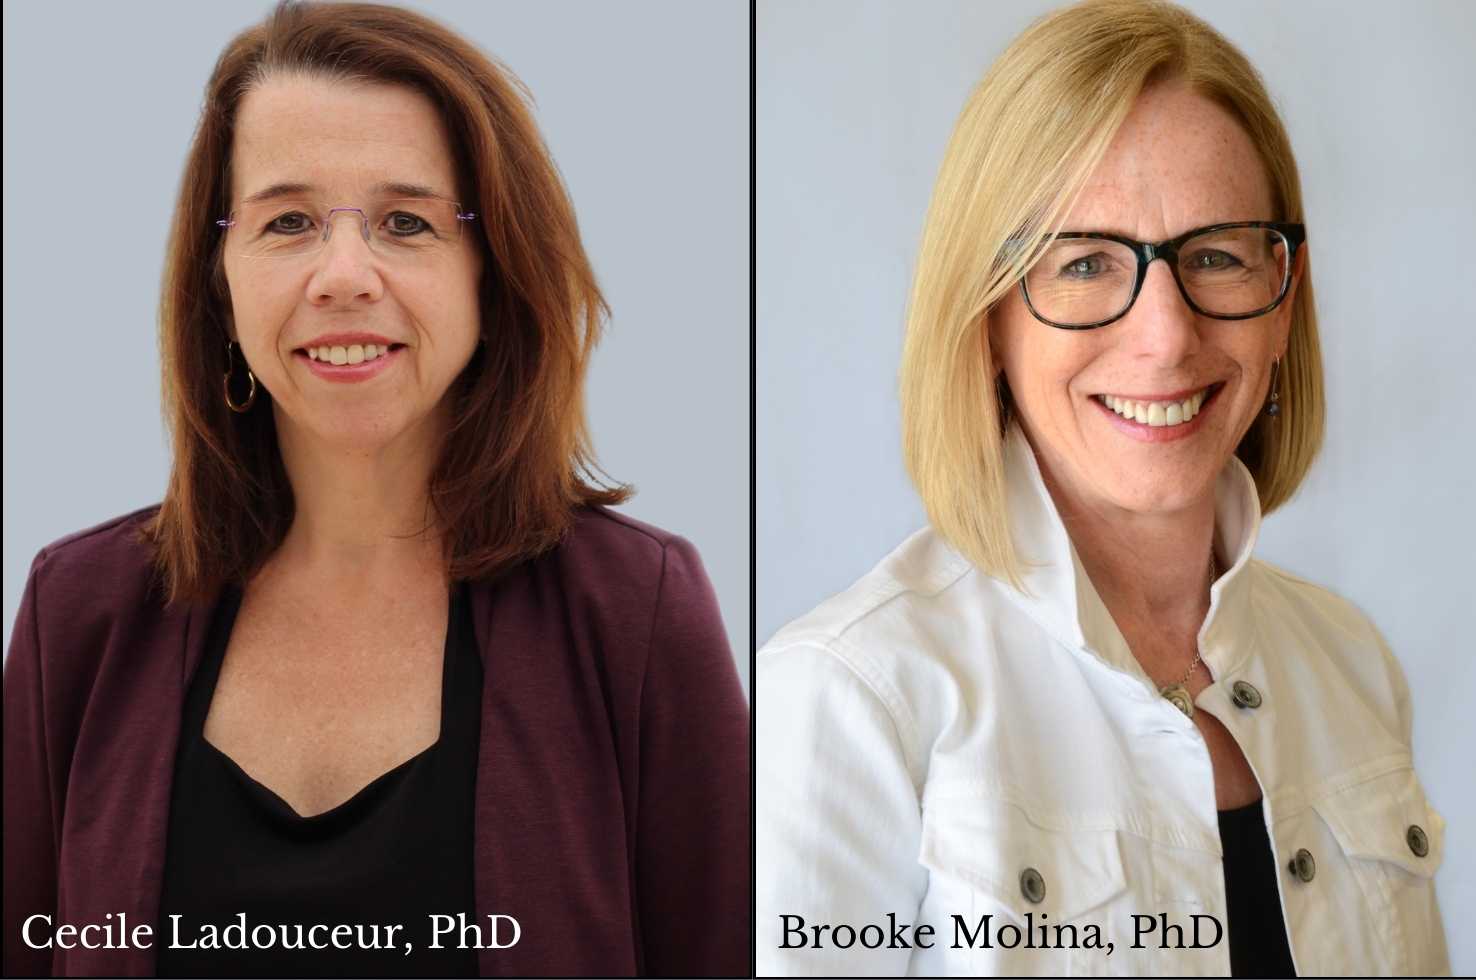 Drs. Cecile Ladouceur and Brooke Molina